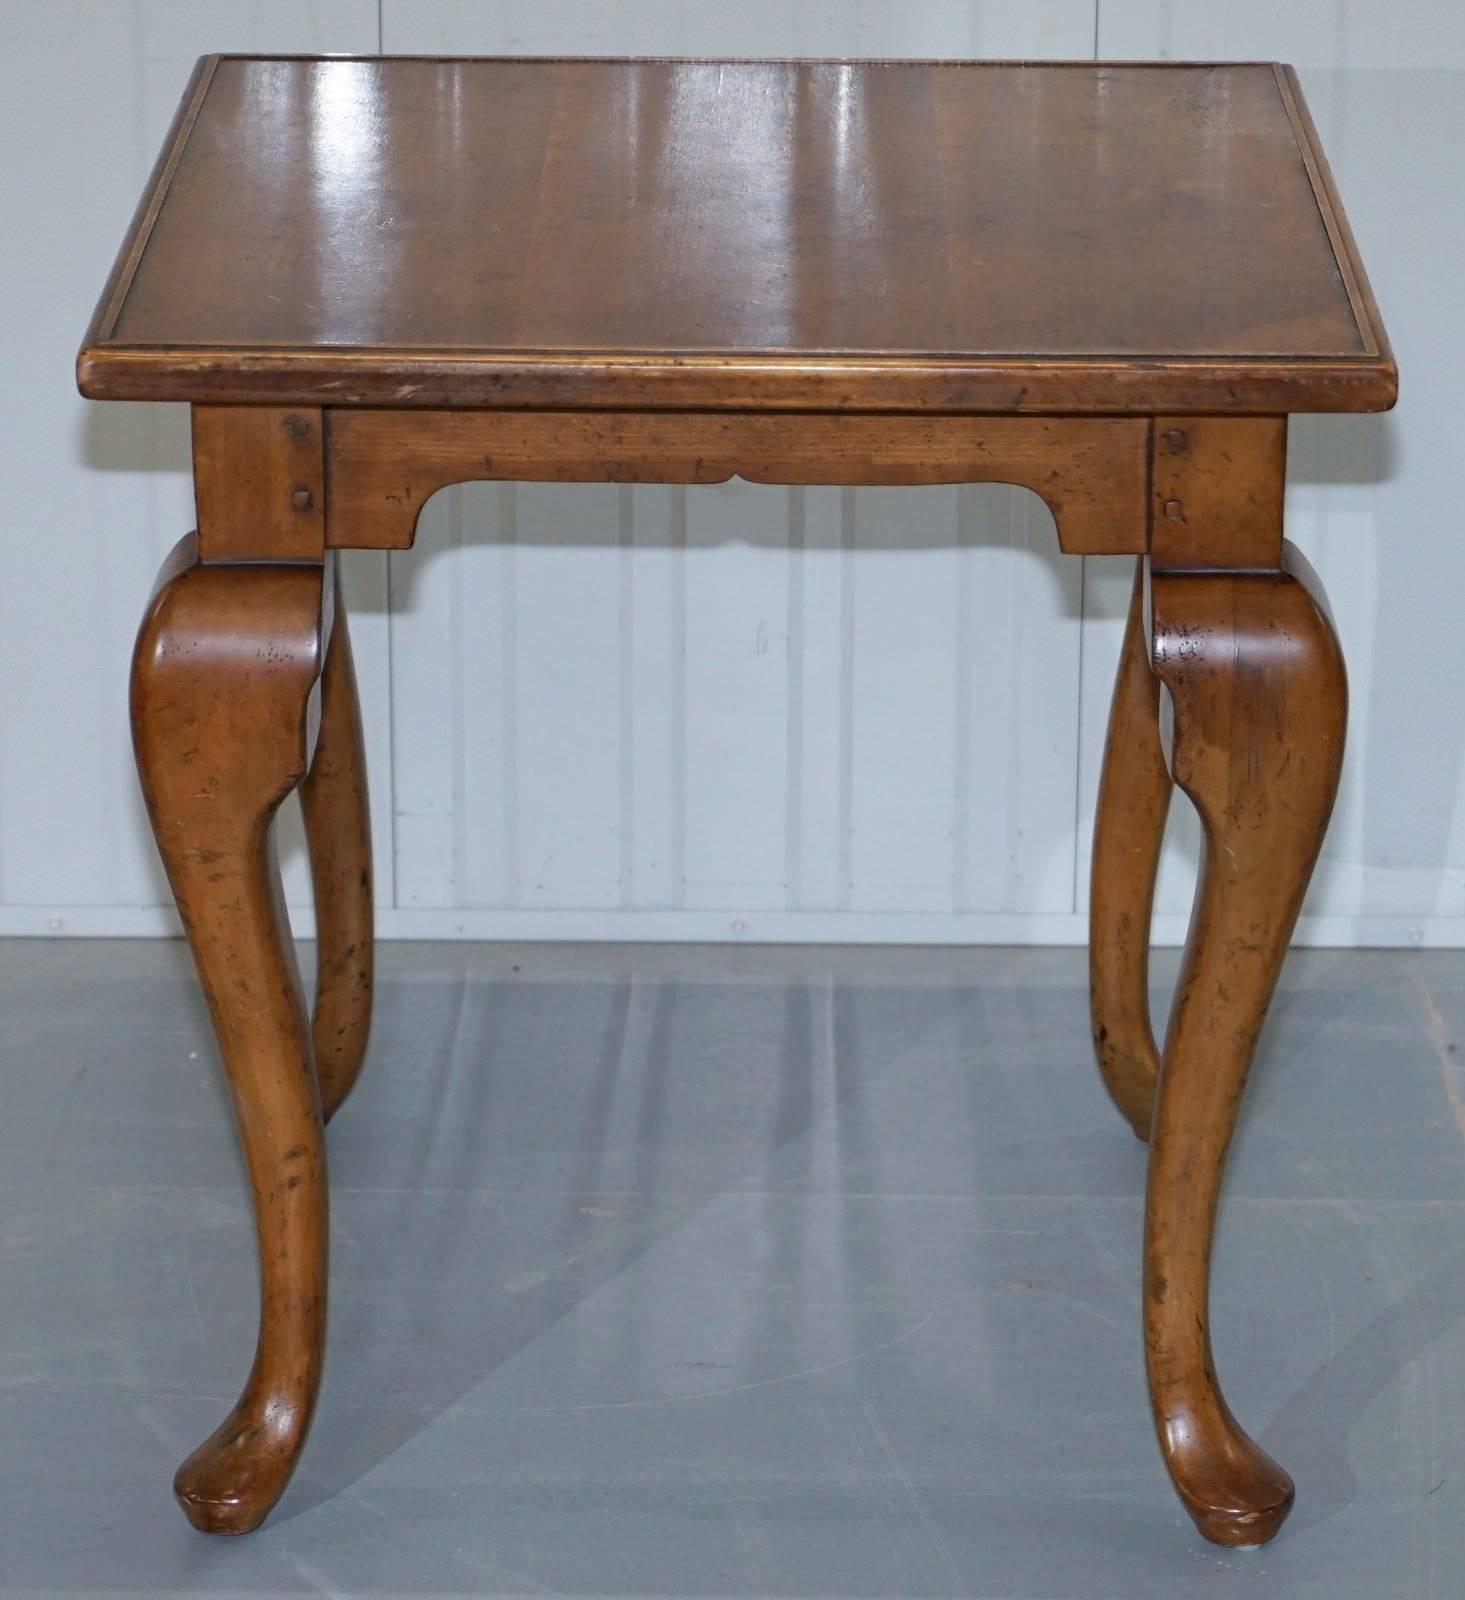 We are delighted to offer for sale this stunning RRP £2699 Ralph Lauren solid walnut occasional or very large side table.

A very good looking and well-made piece, the legs have been timber dowelled in place using traditional furniture making